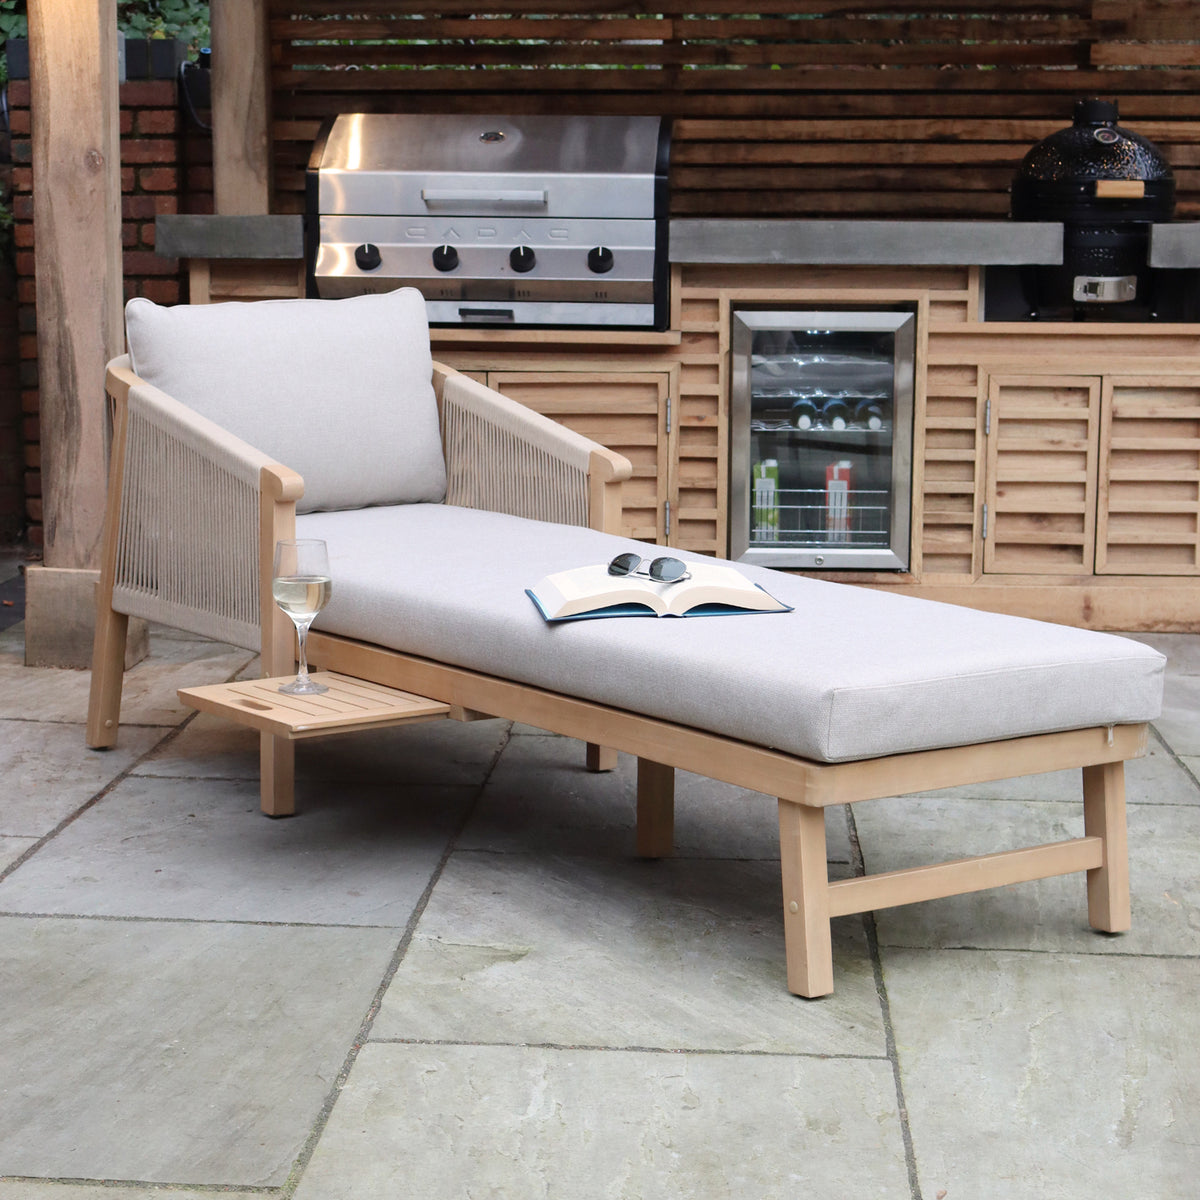 Roma FSC Sunlounger with Pullout Table from Roseland Furniture